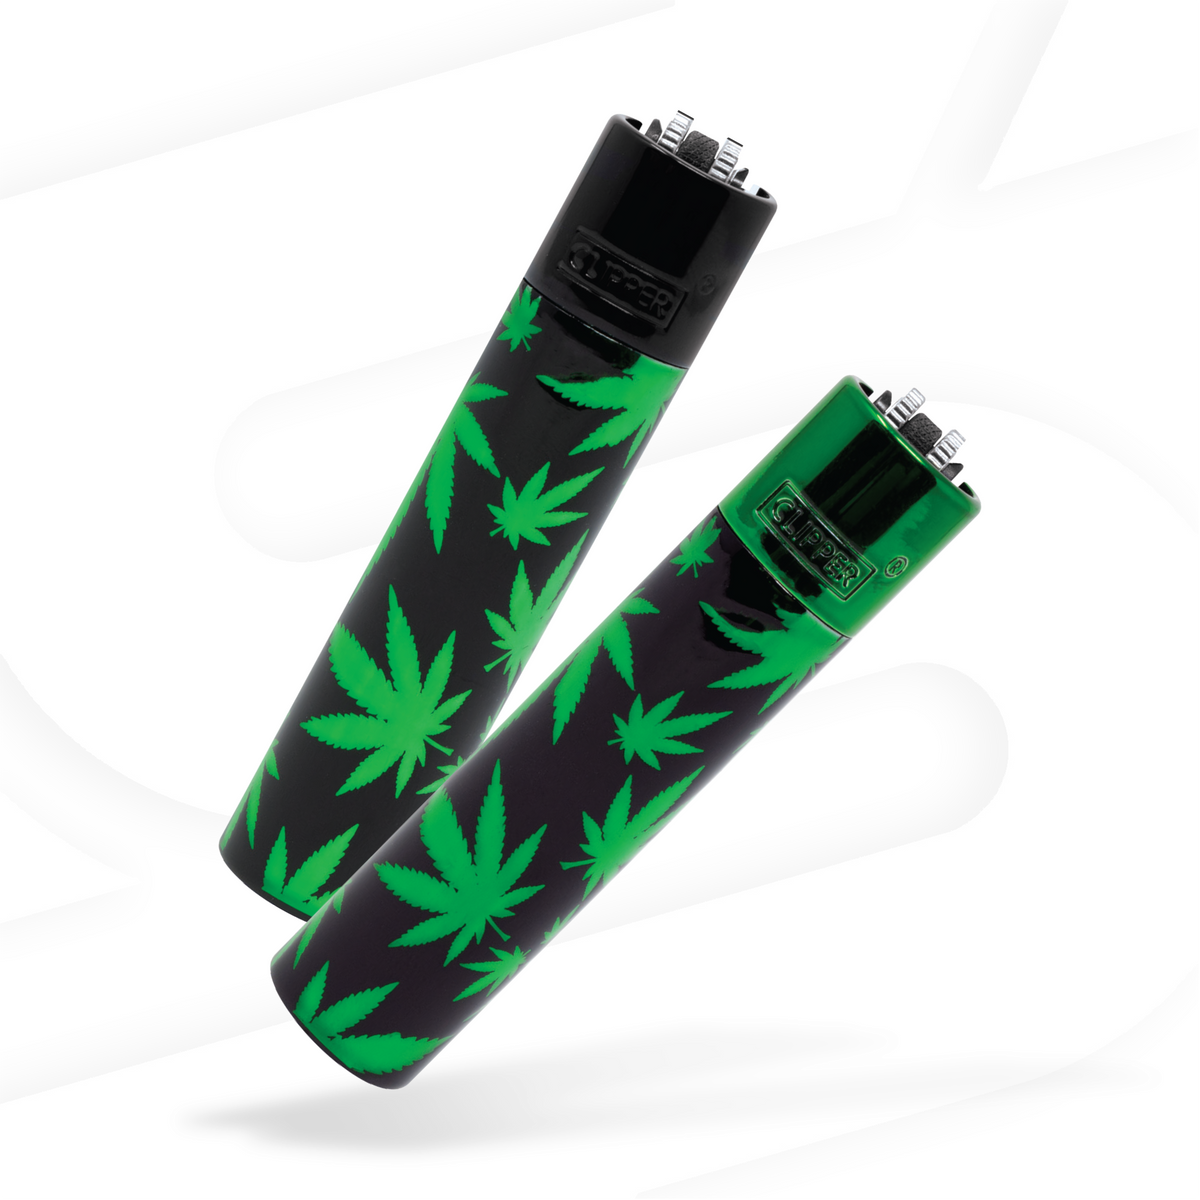 Clipper Green Leaves Lighters Accessories esd-official